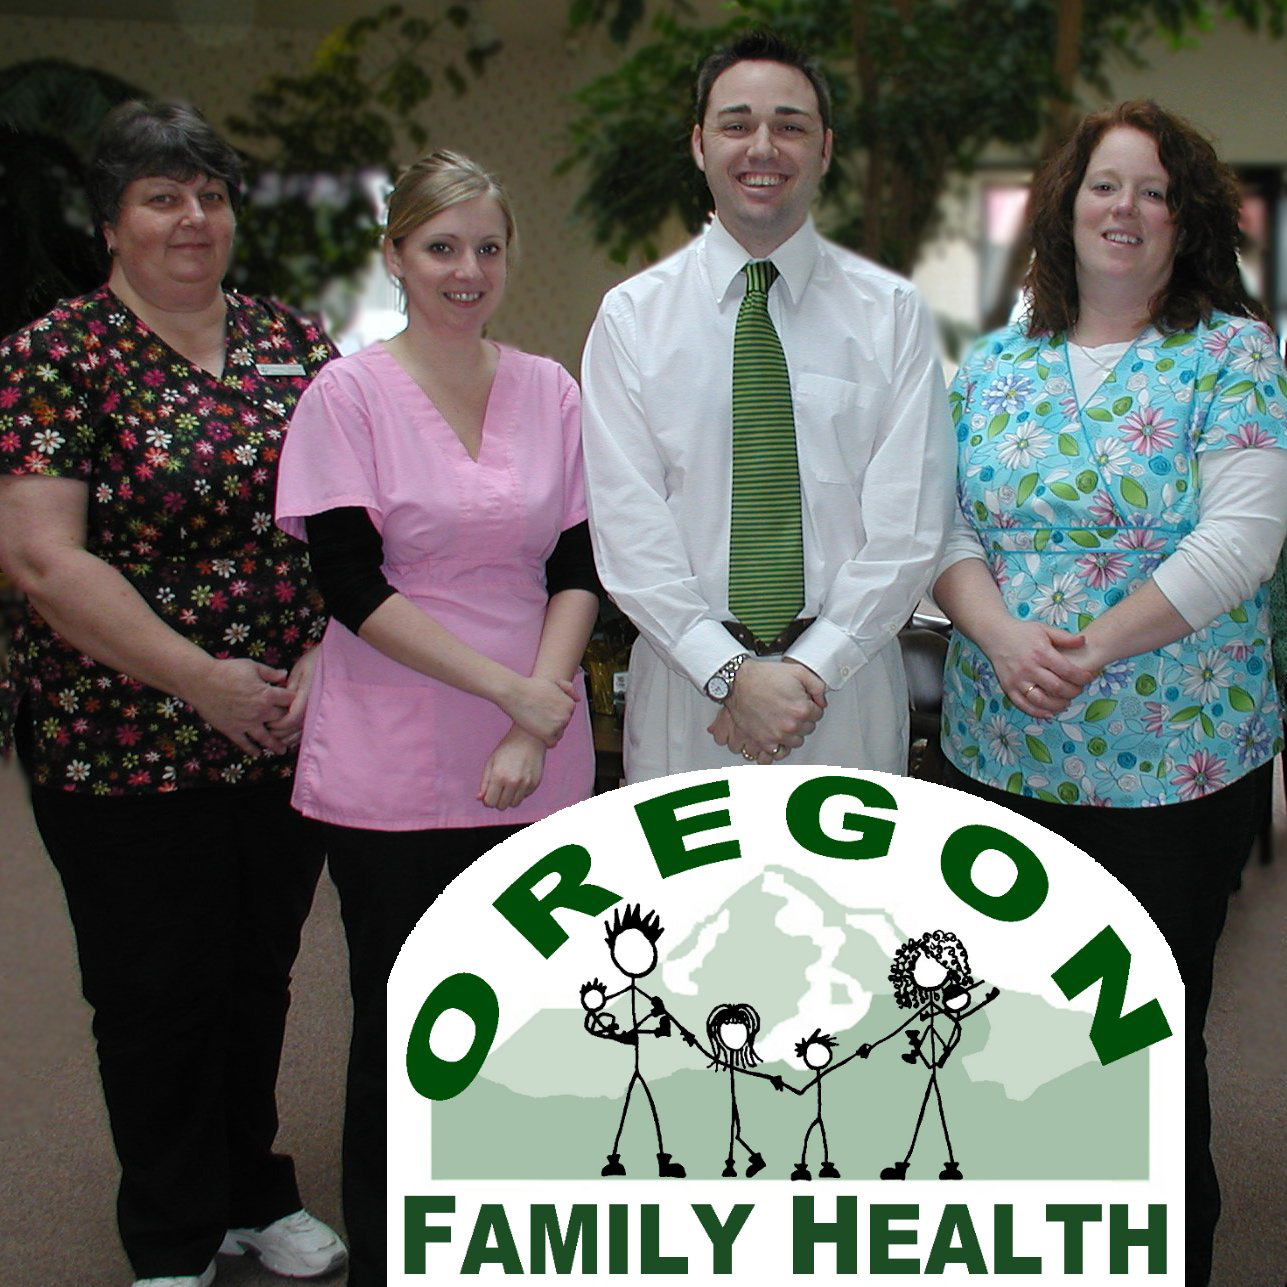 Photo of Dr. Peffley and his staff when he started Oregon Family Health in 2007.